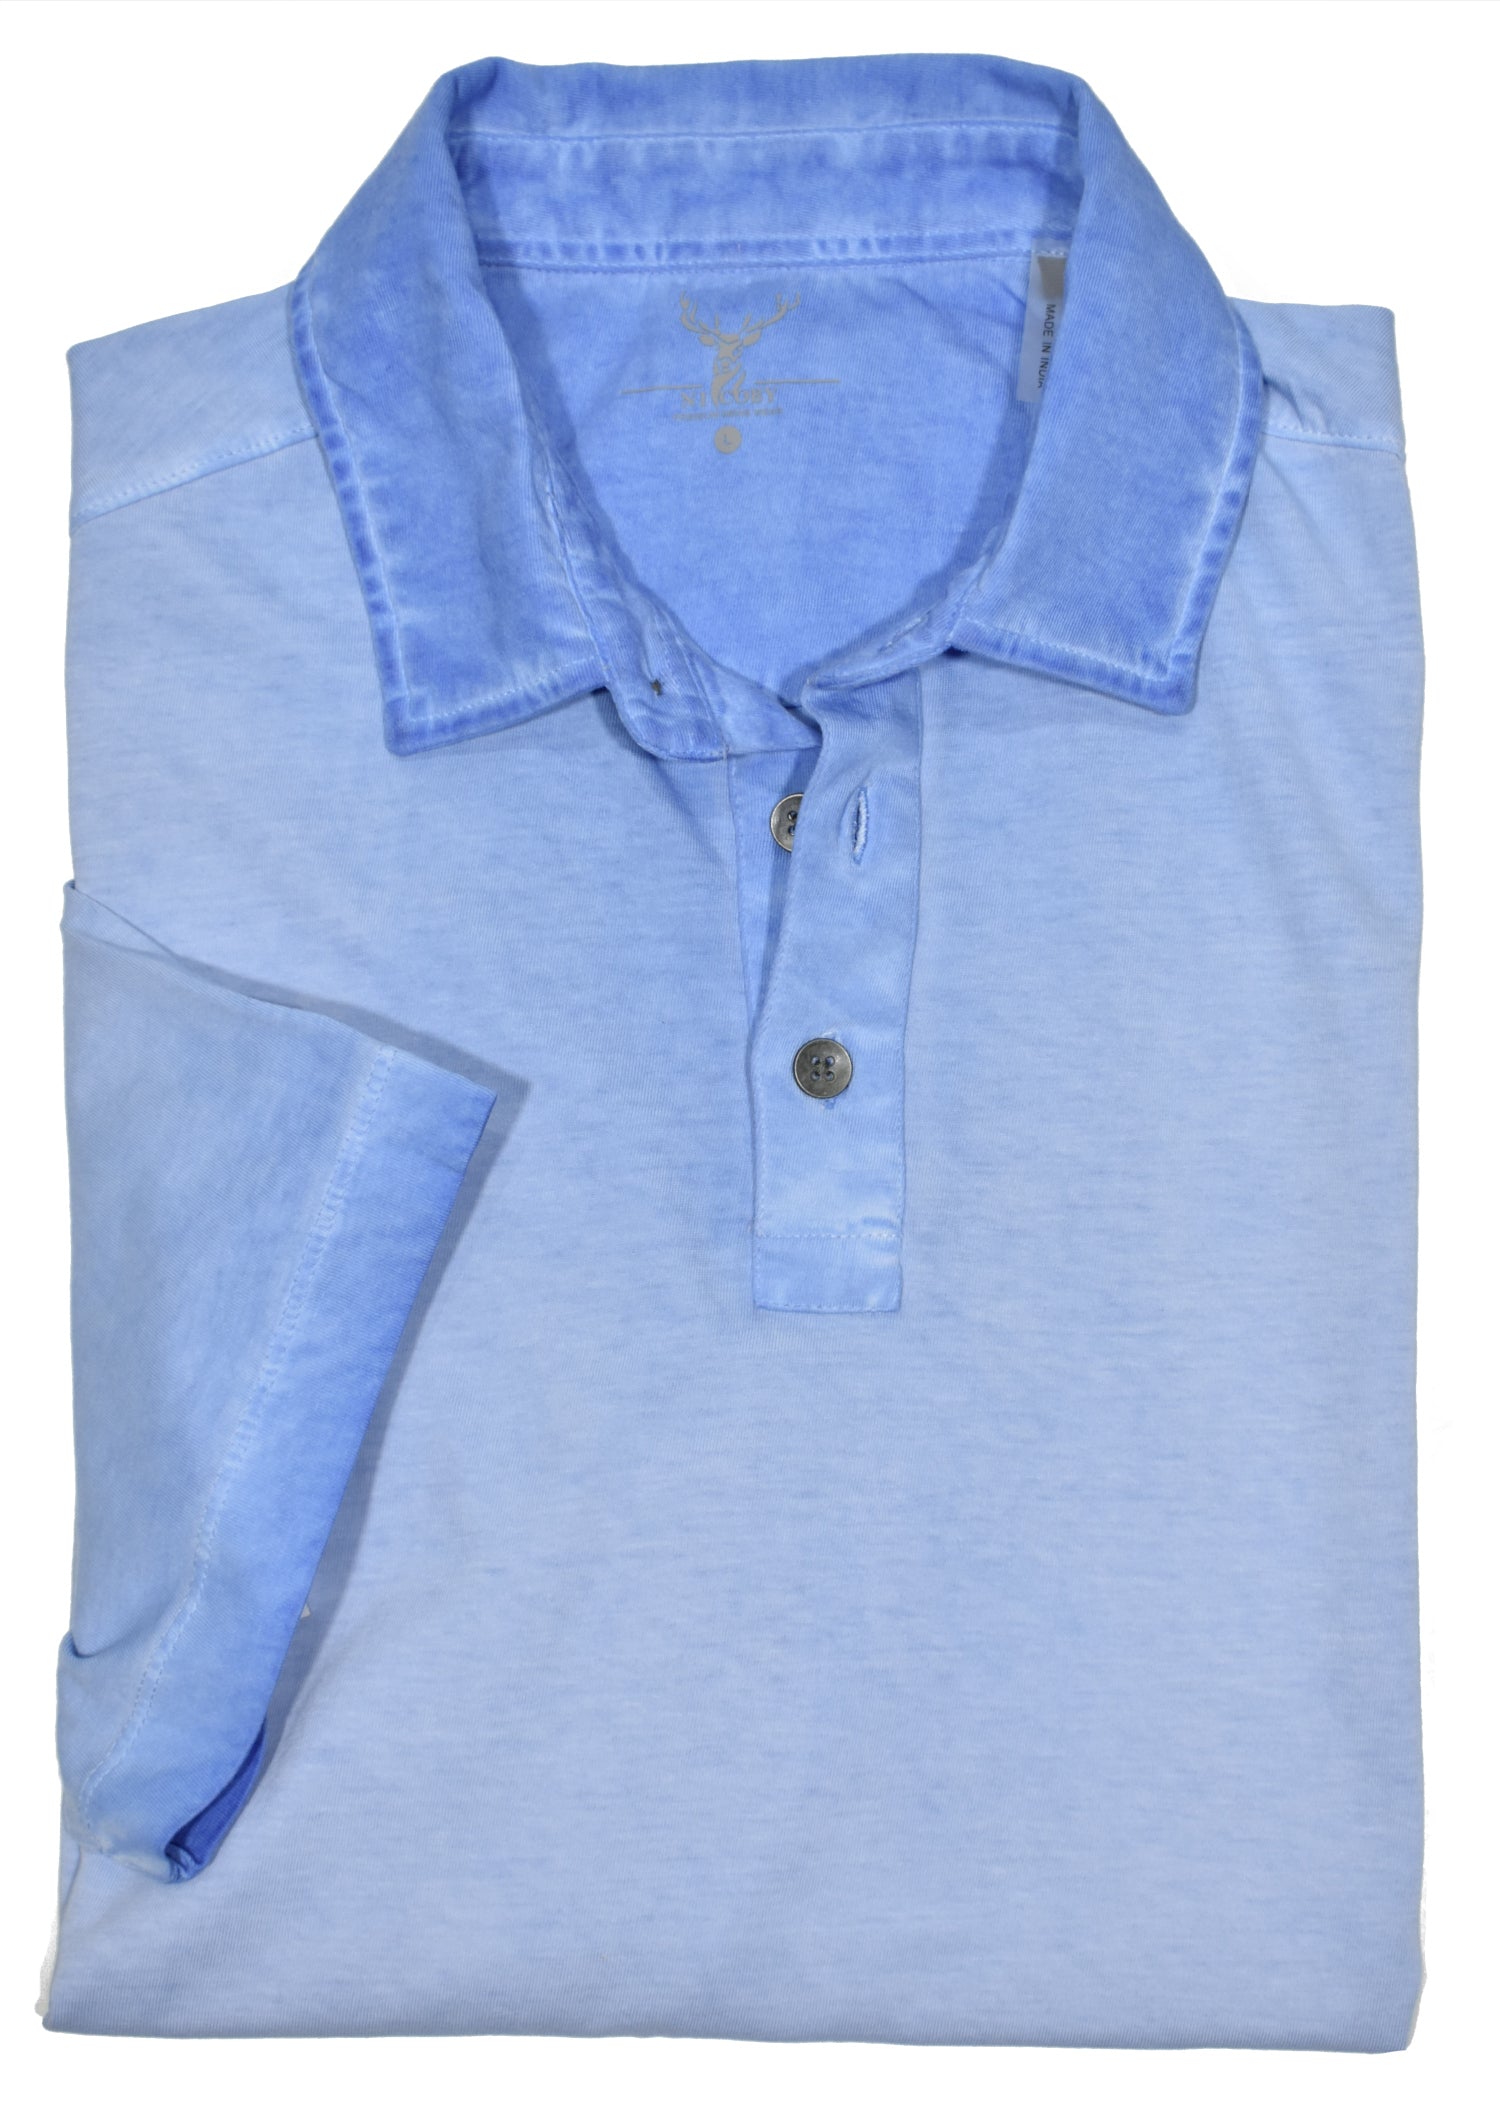 Wear effortless style with the ZN2537 Spray Wash Polo! This ultra-soft shirt is crafted from 100% pima cotton, and is spray washed for a contemporary look. Featuring a soft self-fabric collar, open sleeve, and open bottom, this classic fit polo is stylishly comfortable. Enjoy a cool and confident look.